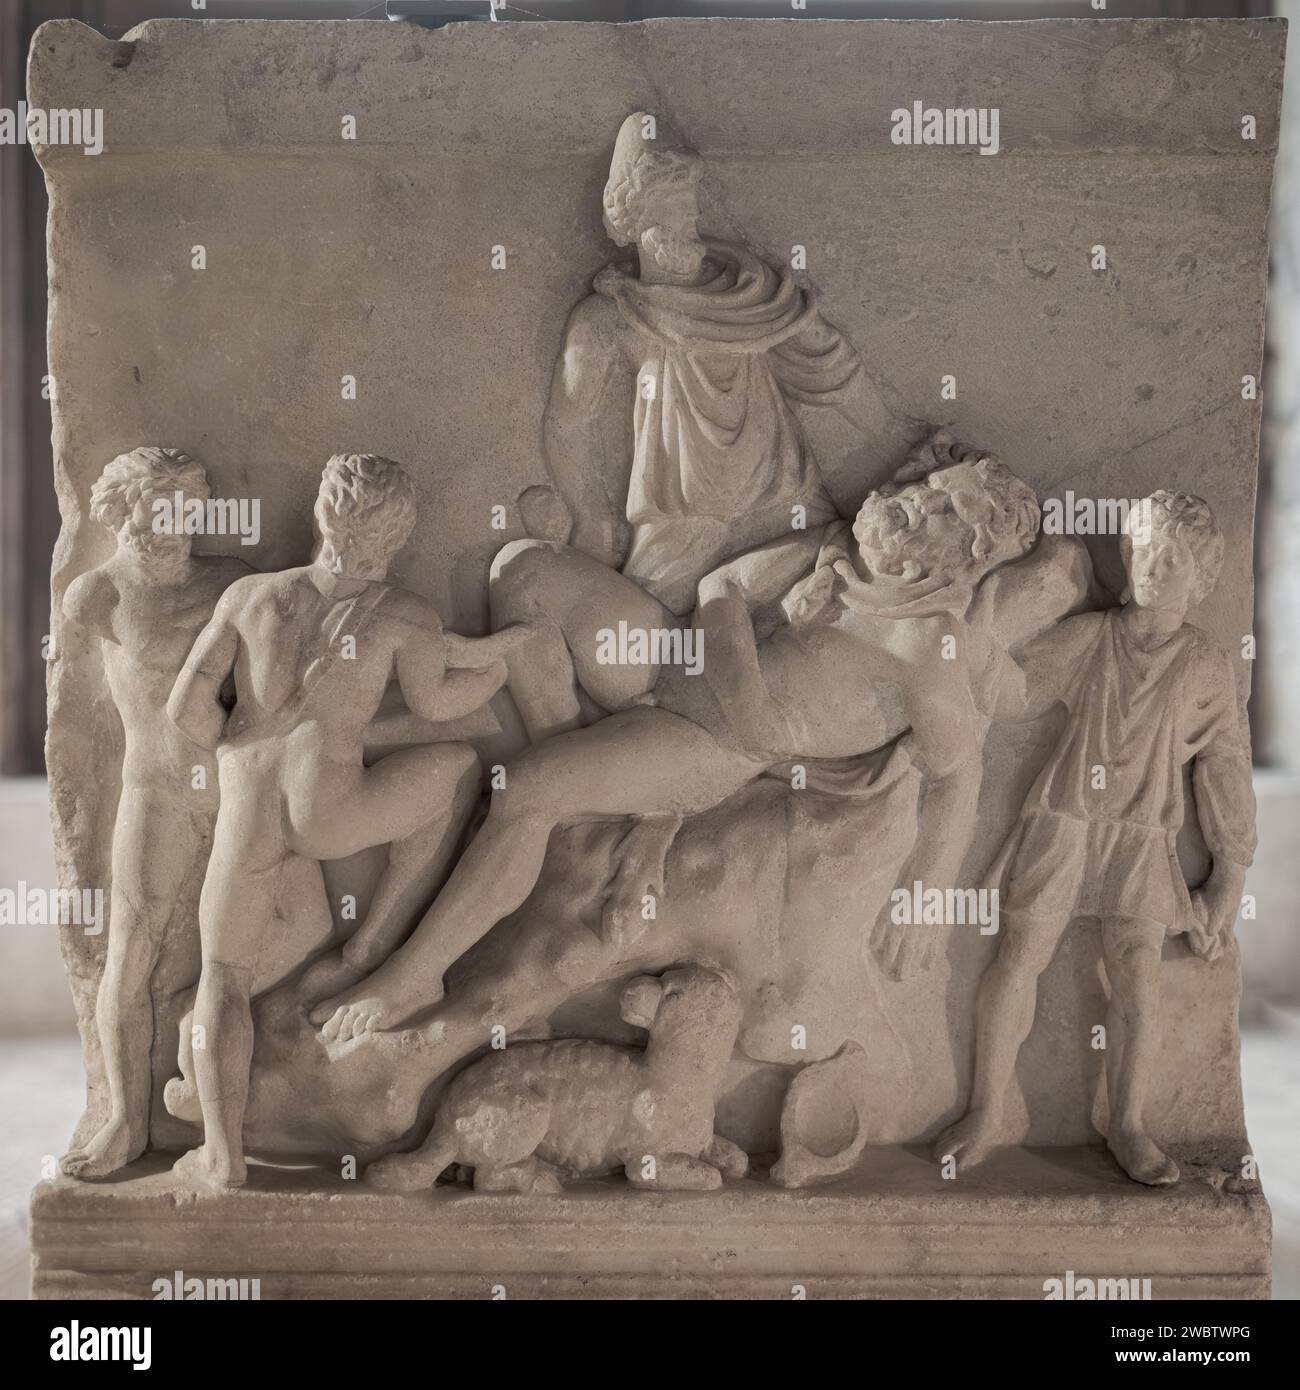 Ancient Roman Art, Relief from a sarcophagus with scene from the Odyssey (Ulysses and his companions blind Polyphemus) 2nd century AD; Castello Ursino Stock Photo